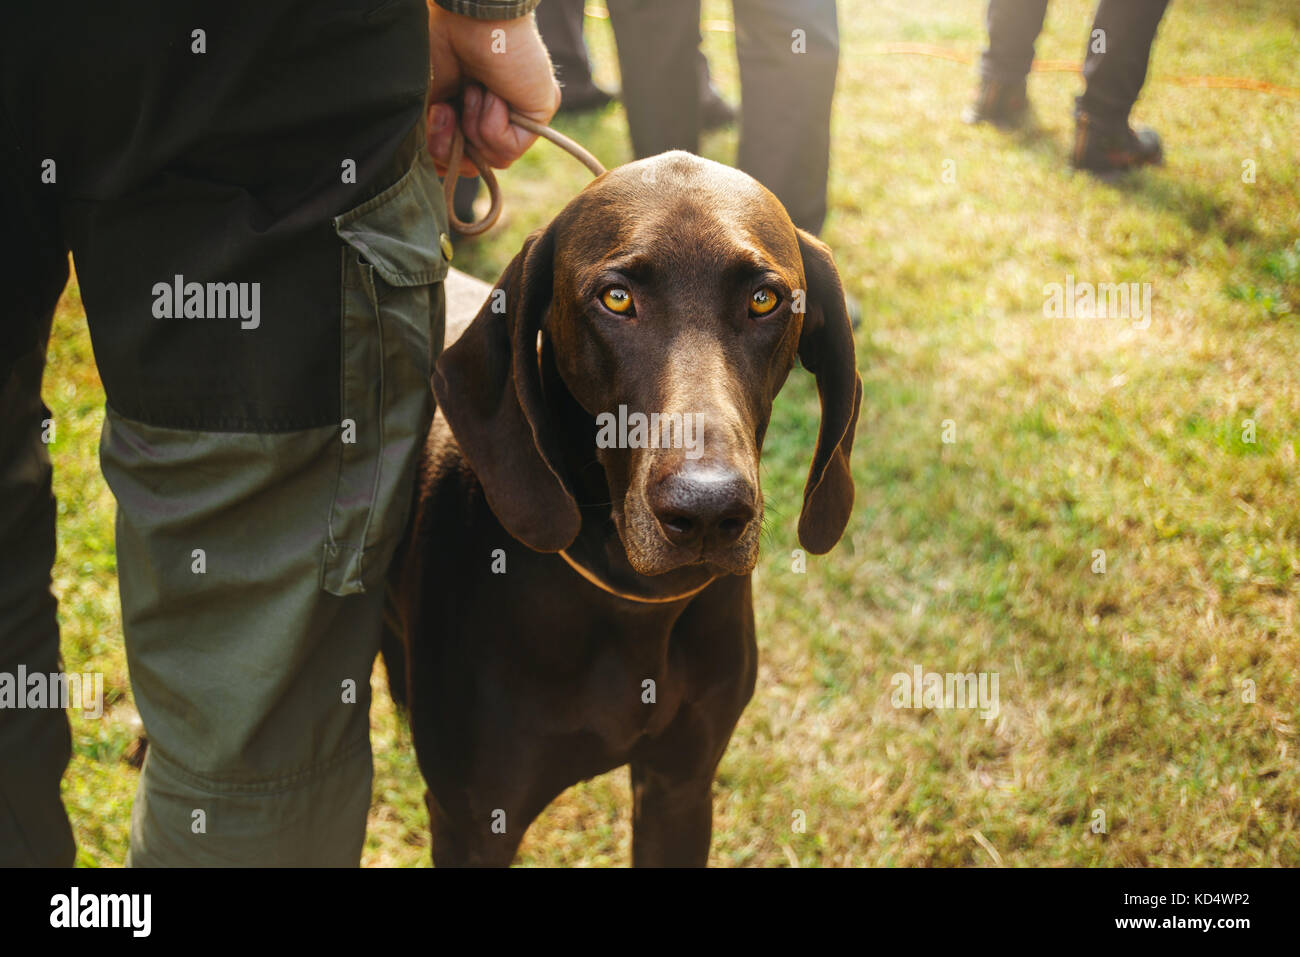 An owner holding his dog on a leash. It is a brown hunting hunting german shorthaired pointer, or kurzhaar. Stock Photo